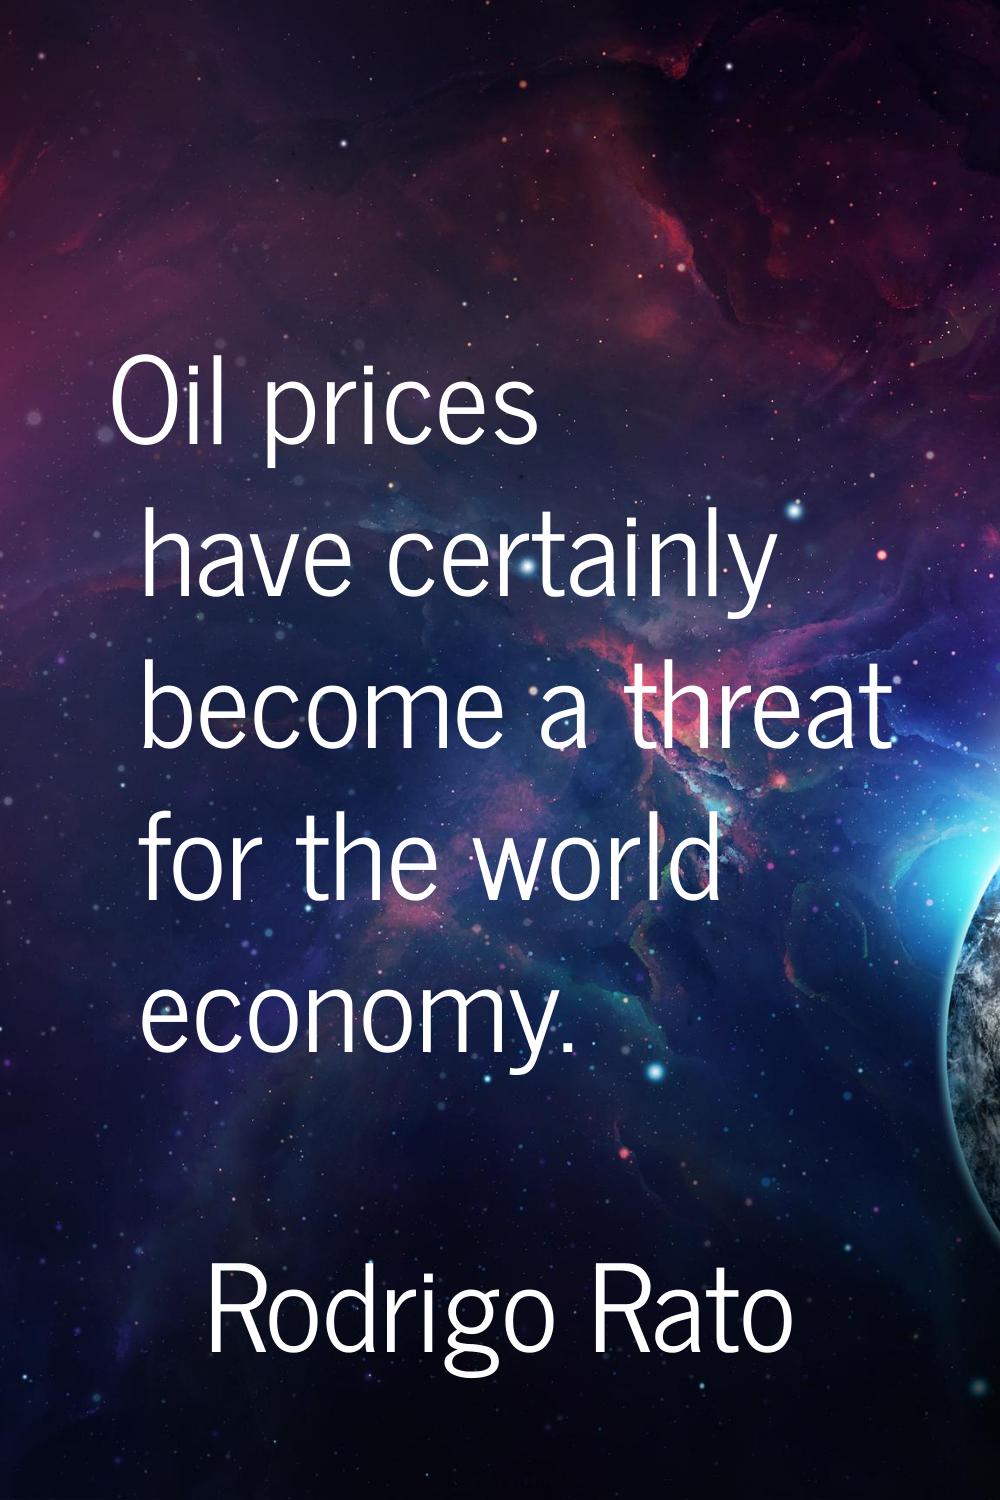 Oil prices have certainly become a threat for the world economy.